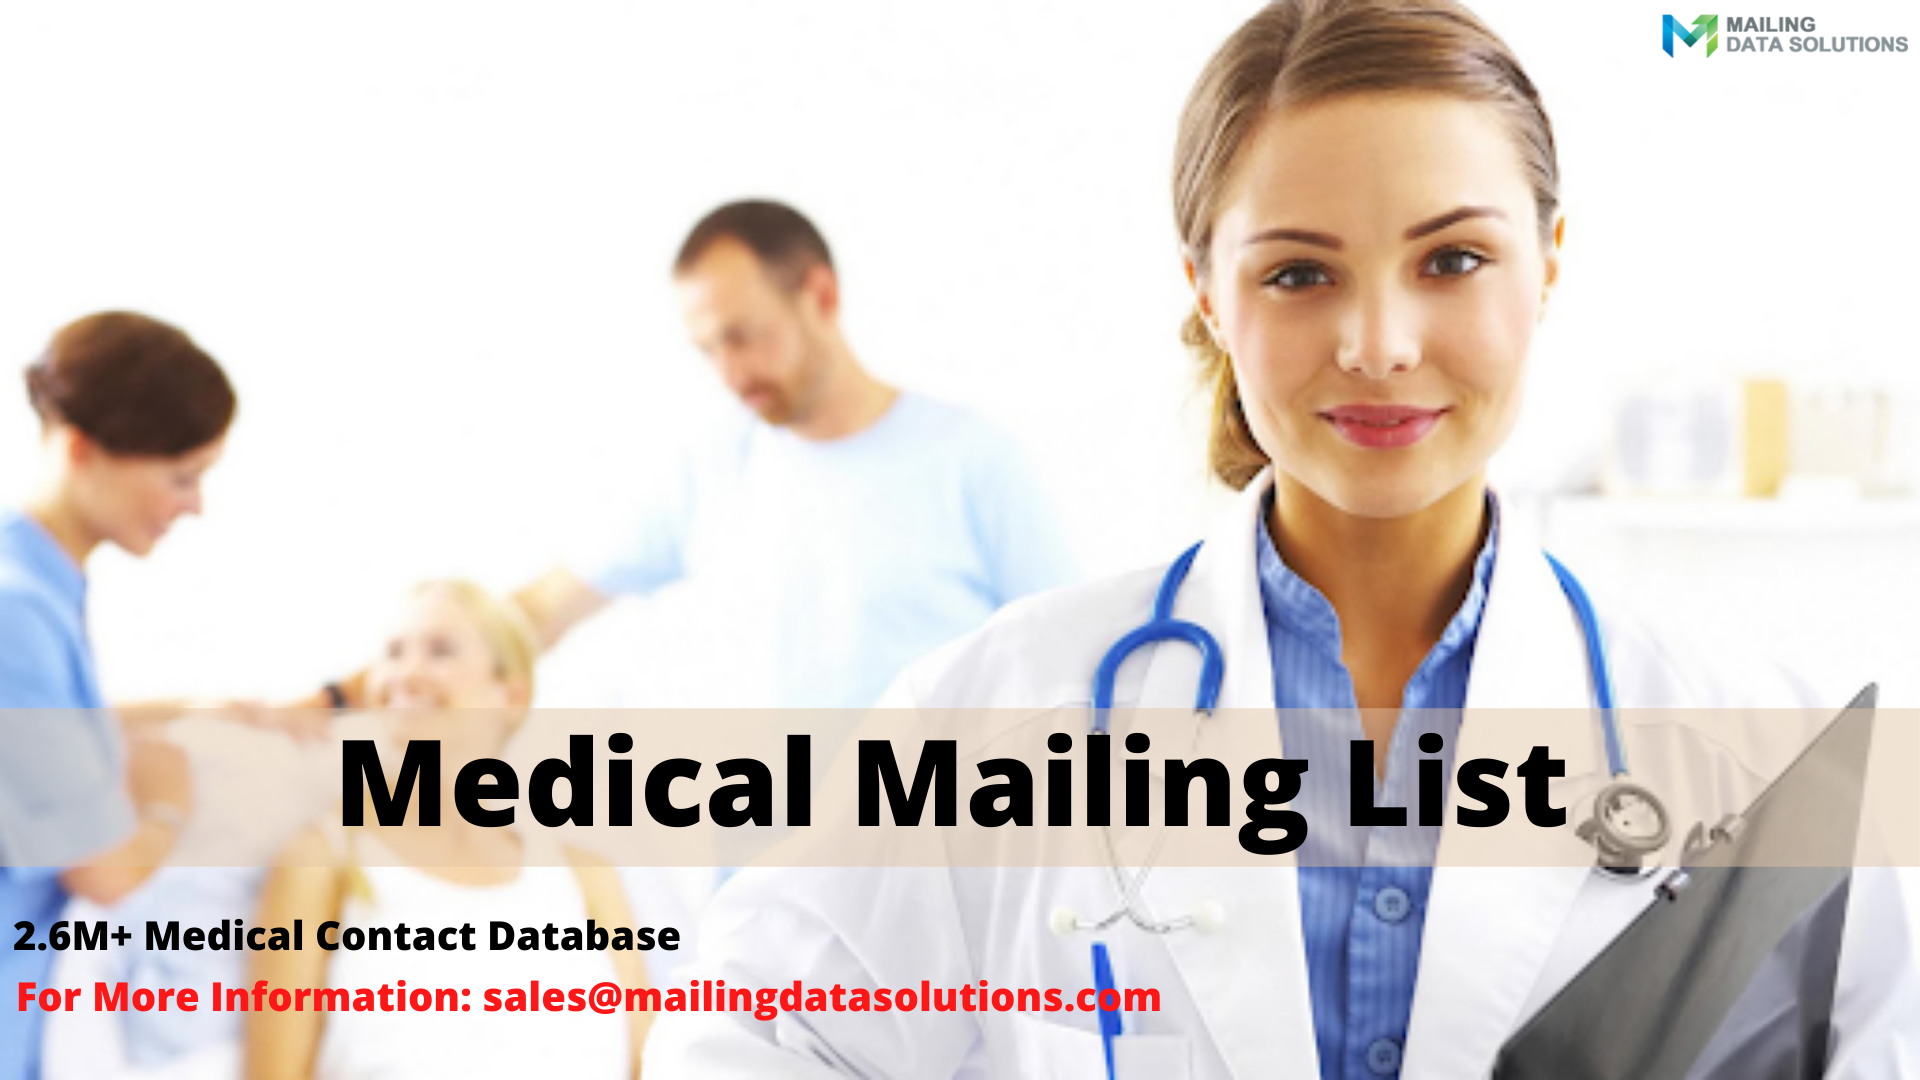 Industry Database Provider Mailing Data Solutions Relaunched Upgraded Medical Mailing List